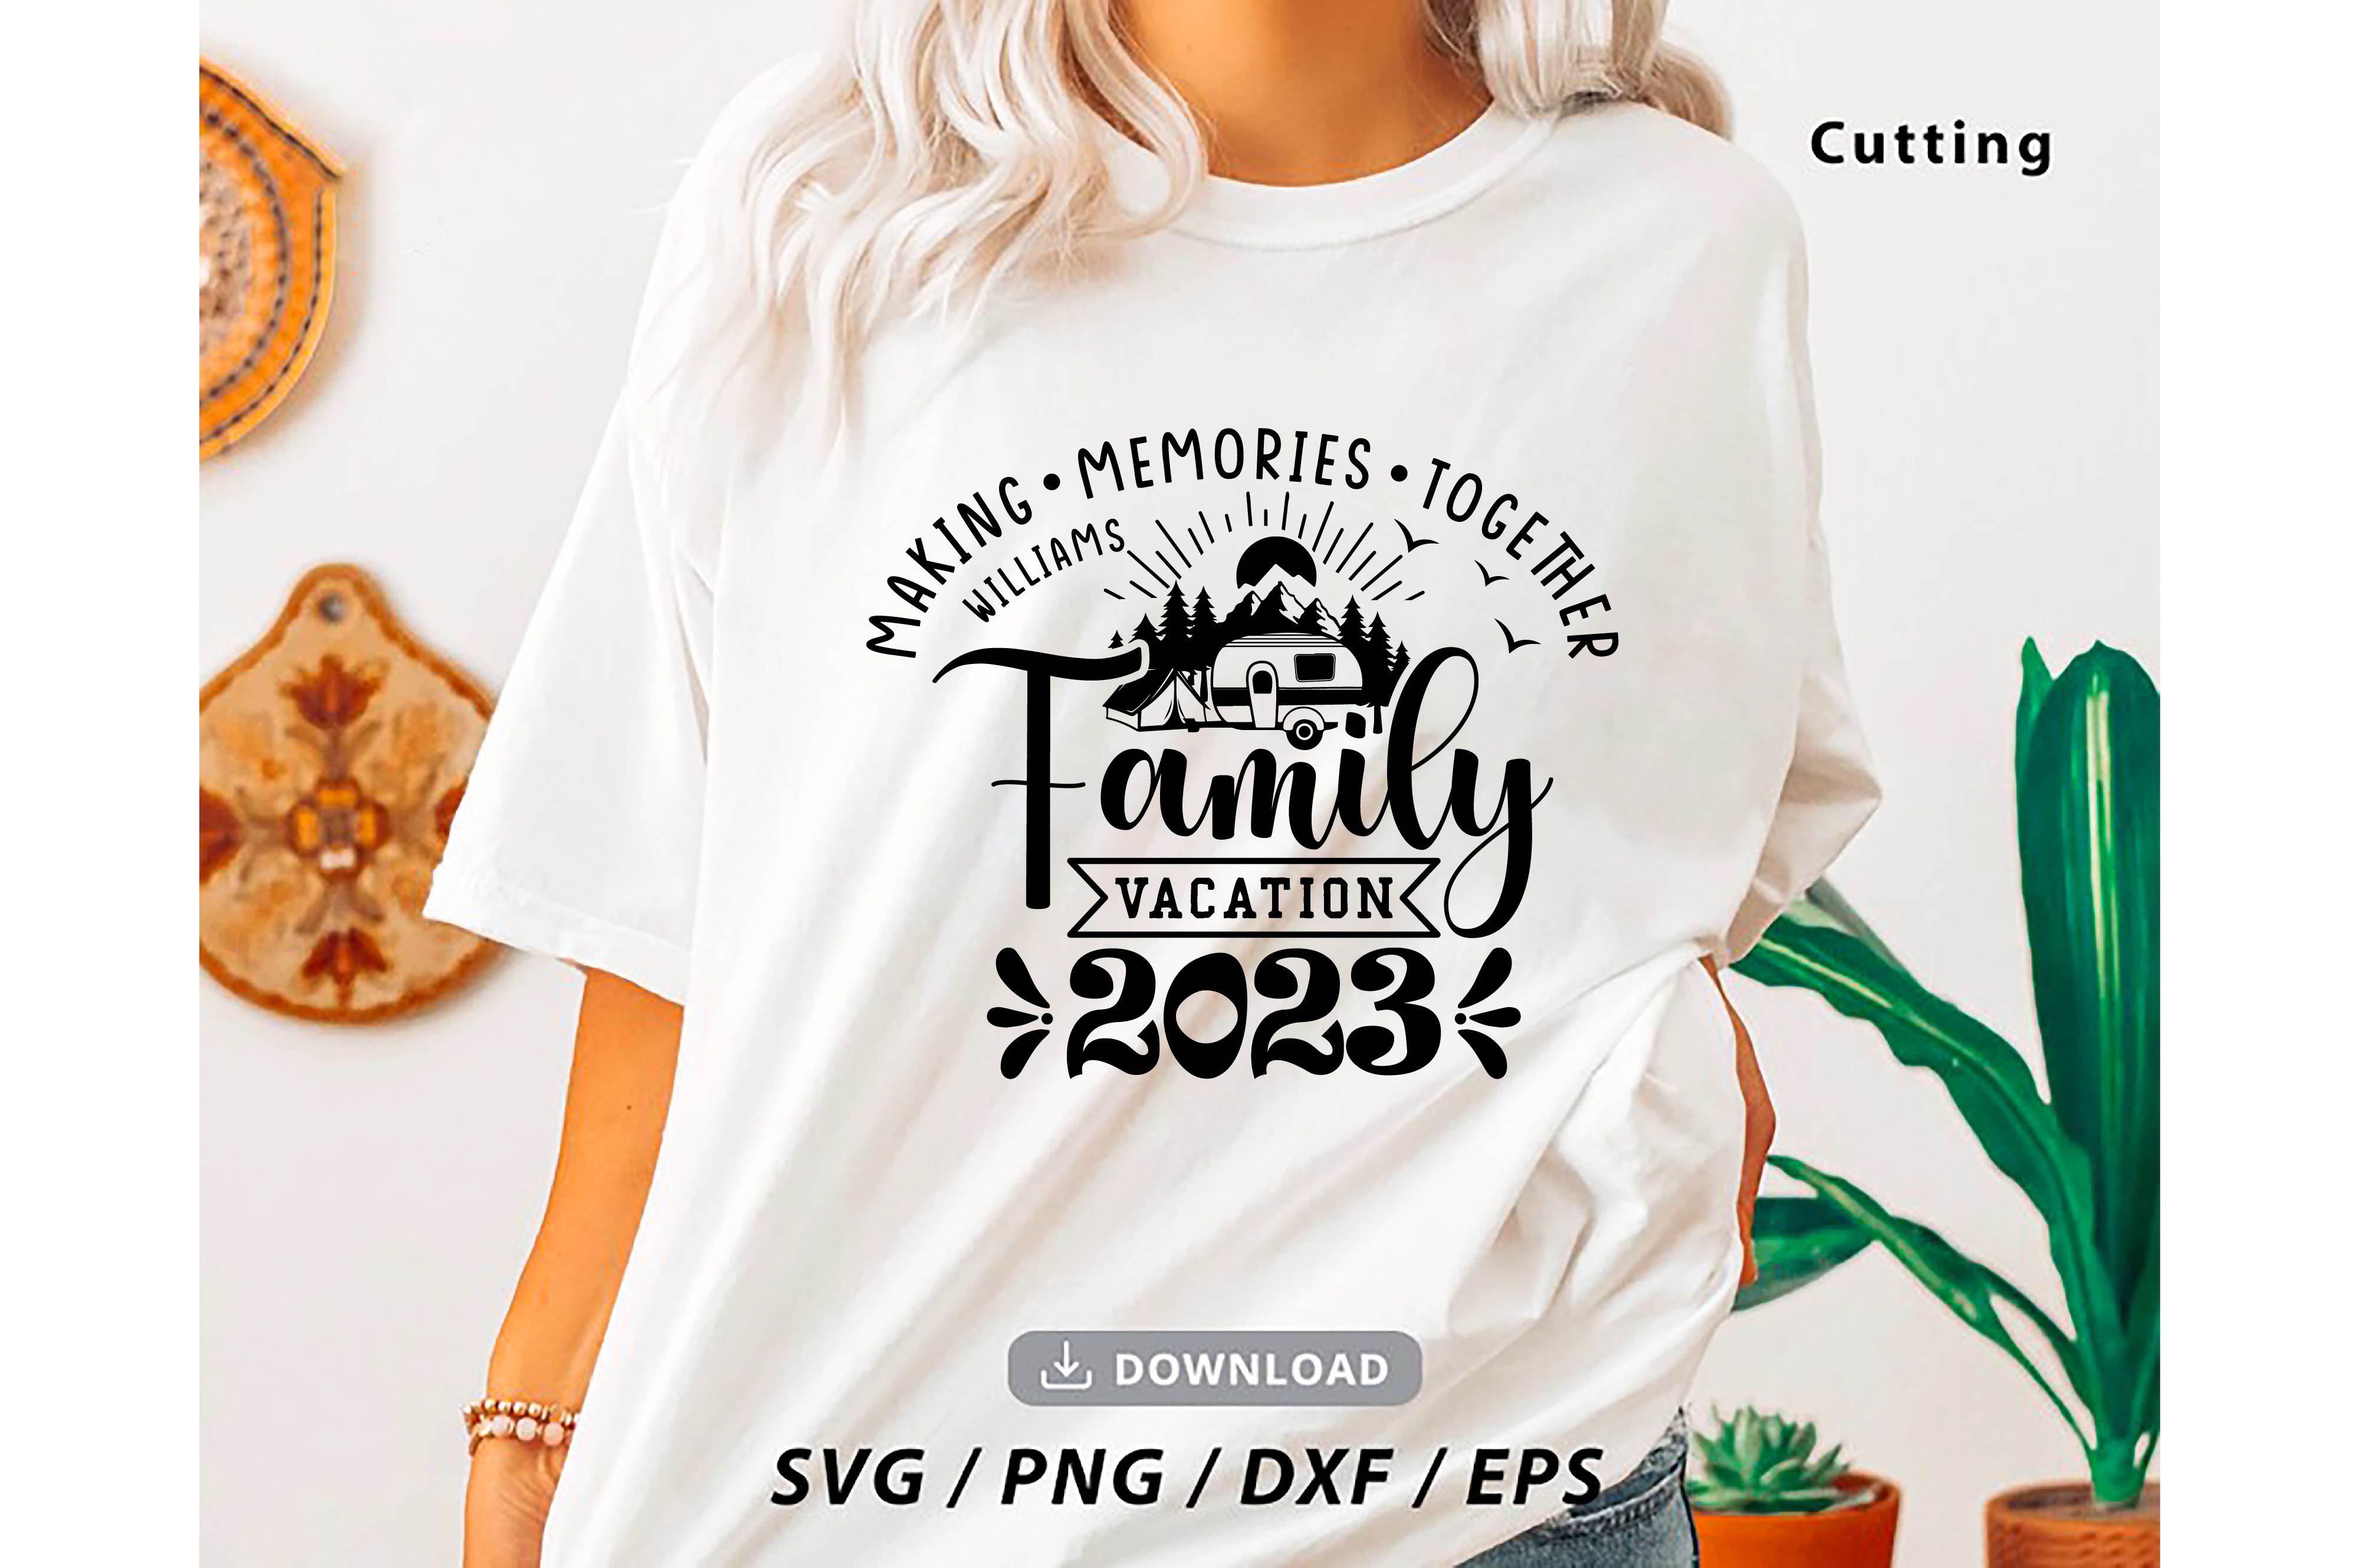 family vacation 2023 svg making memories together custom family vacation cut files summer 2023 vacations 09 61